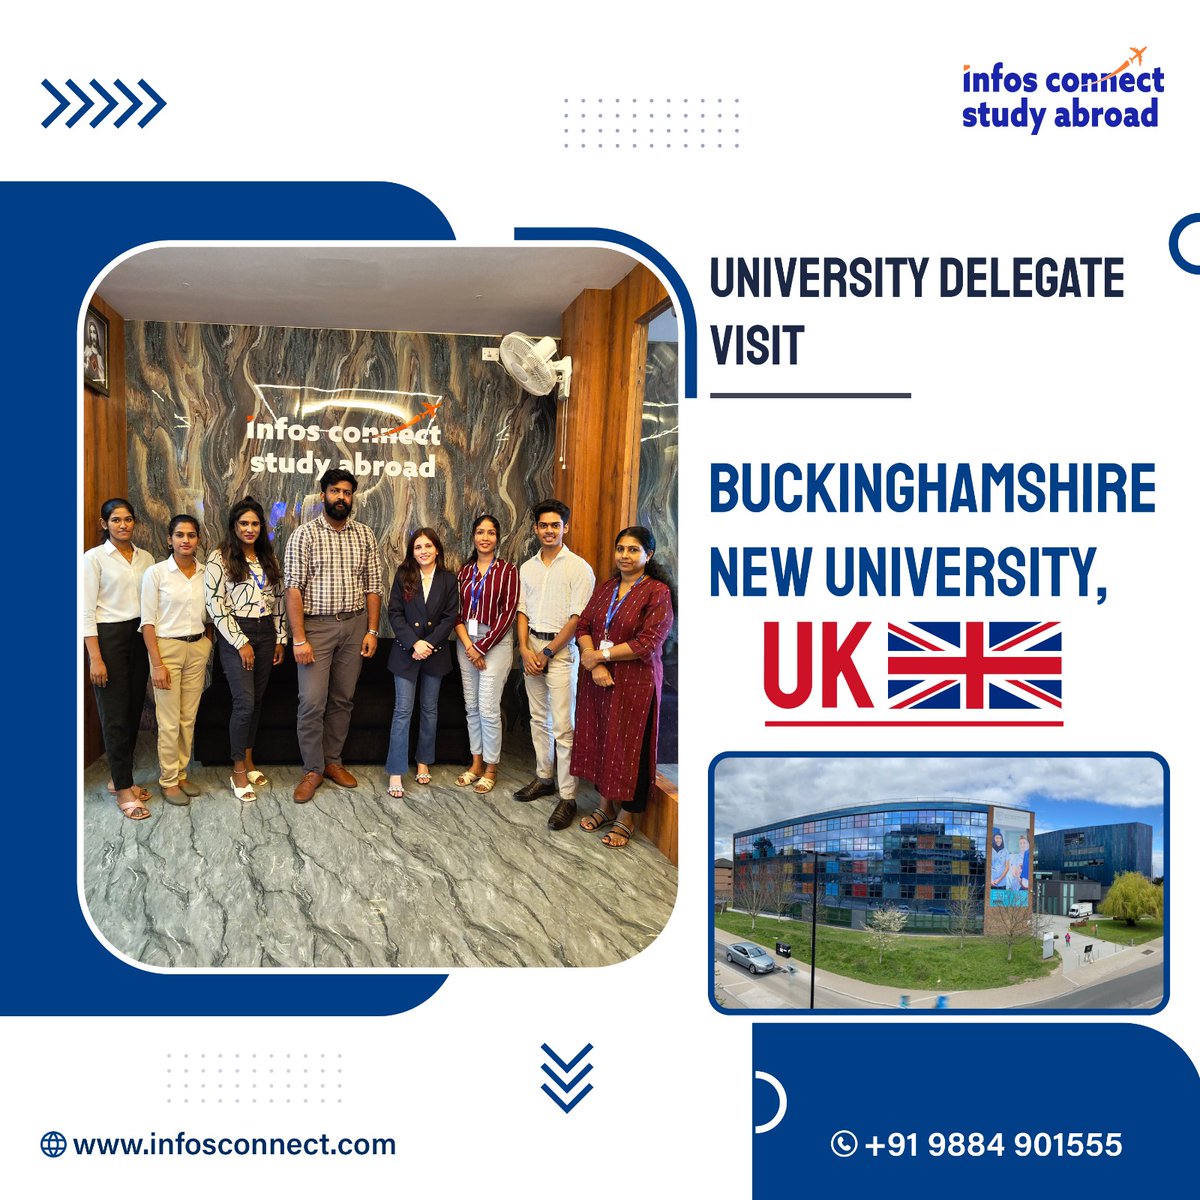 Buckinghamshire New University delegate visit at Infos Connect Study Abroad Cochin Branch
 +91 98849 01555
infosconnect.com
#studyabraod #abroadeducation #highereducation #studyoverseas #studyeurope #abroad #university #uk #ukeducation #ukpr  #buckinghamshirenewuni